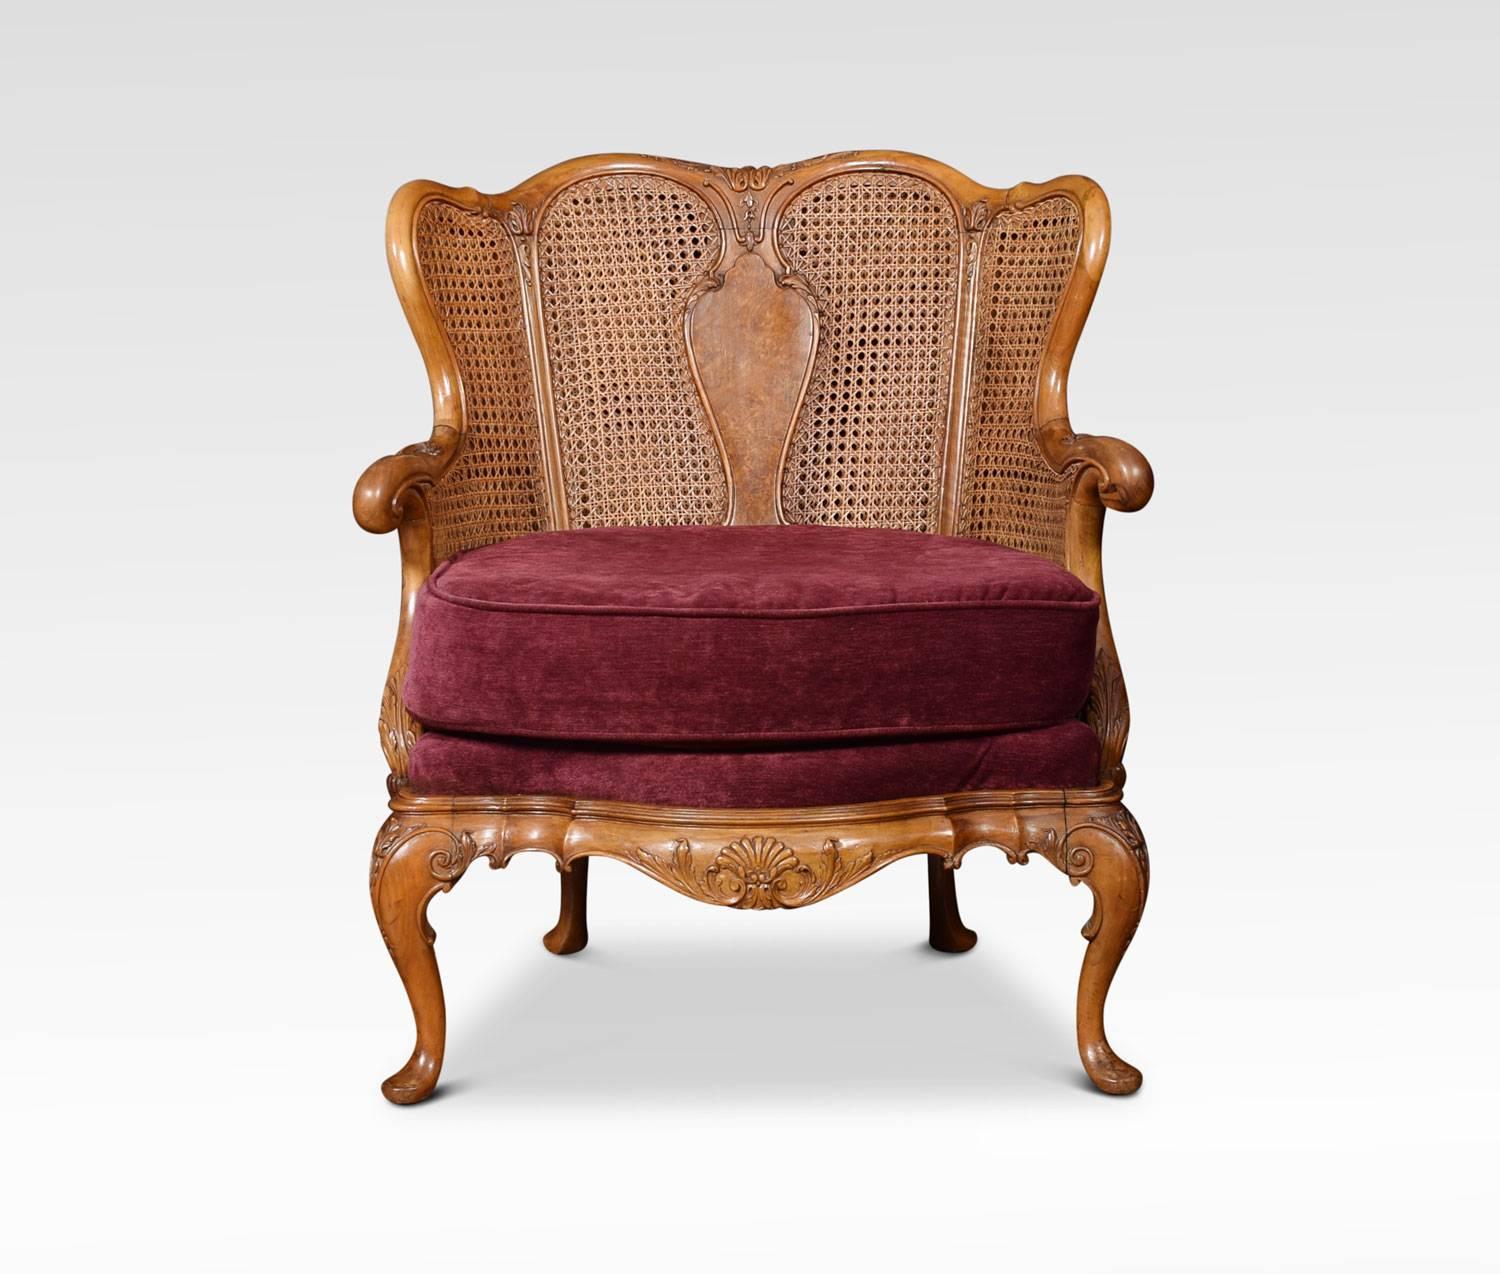 Pair of Rococo design walnut bergere armchairs, the shaped top rail above moulded vase shaped splats, double caned back and sides, enclosed by out swept arms. The removable back and seat upholstered cushions, raised up on carved cabriole